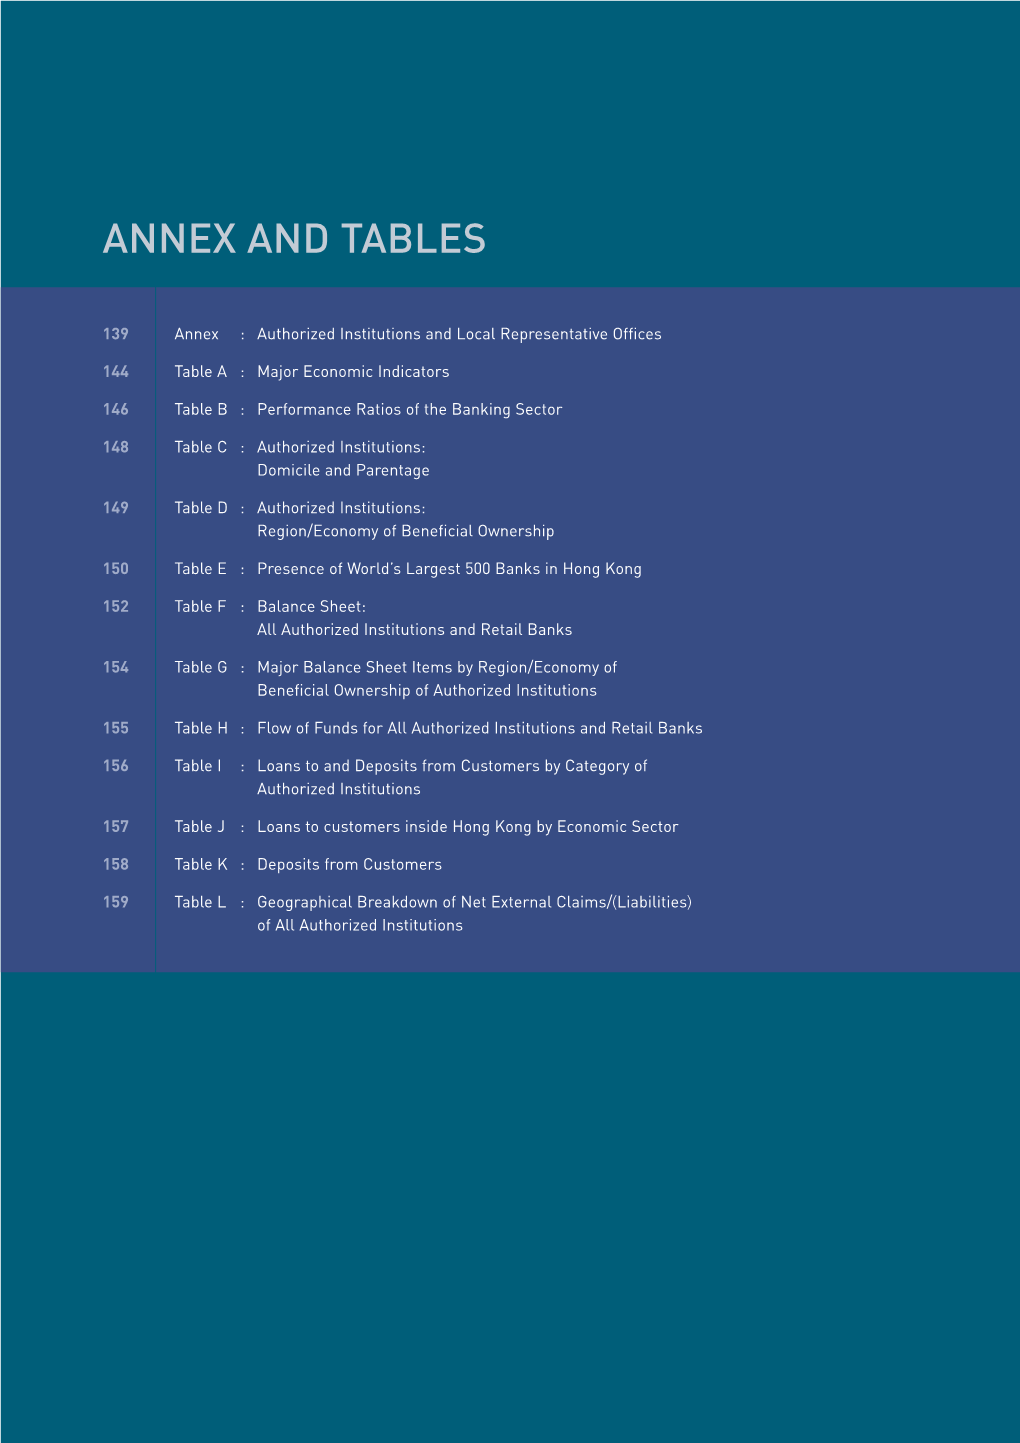 Annex and Tables